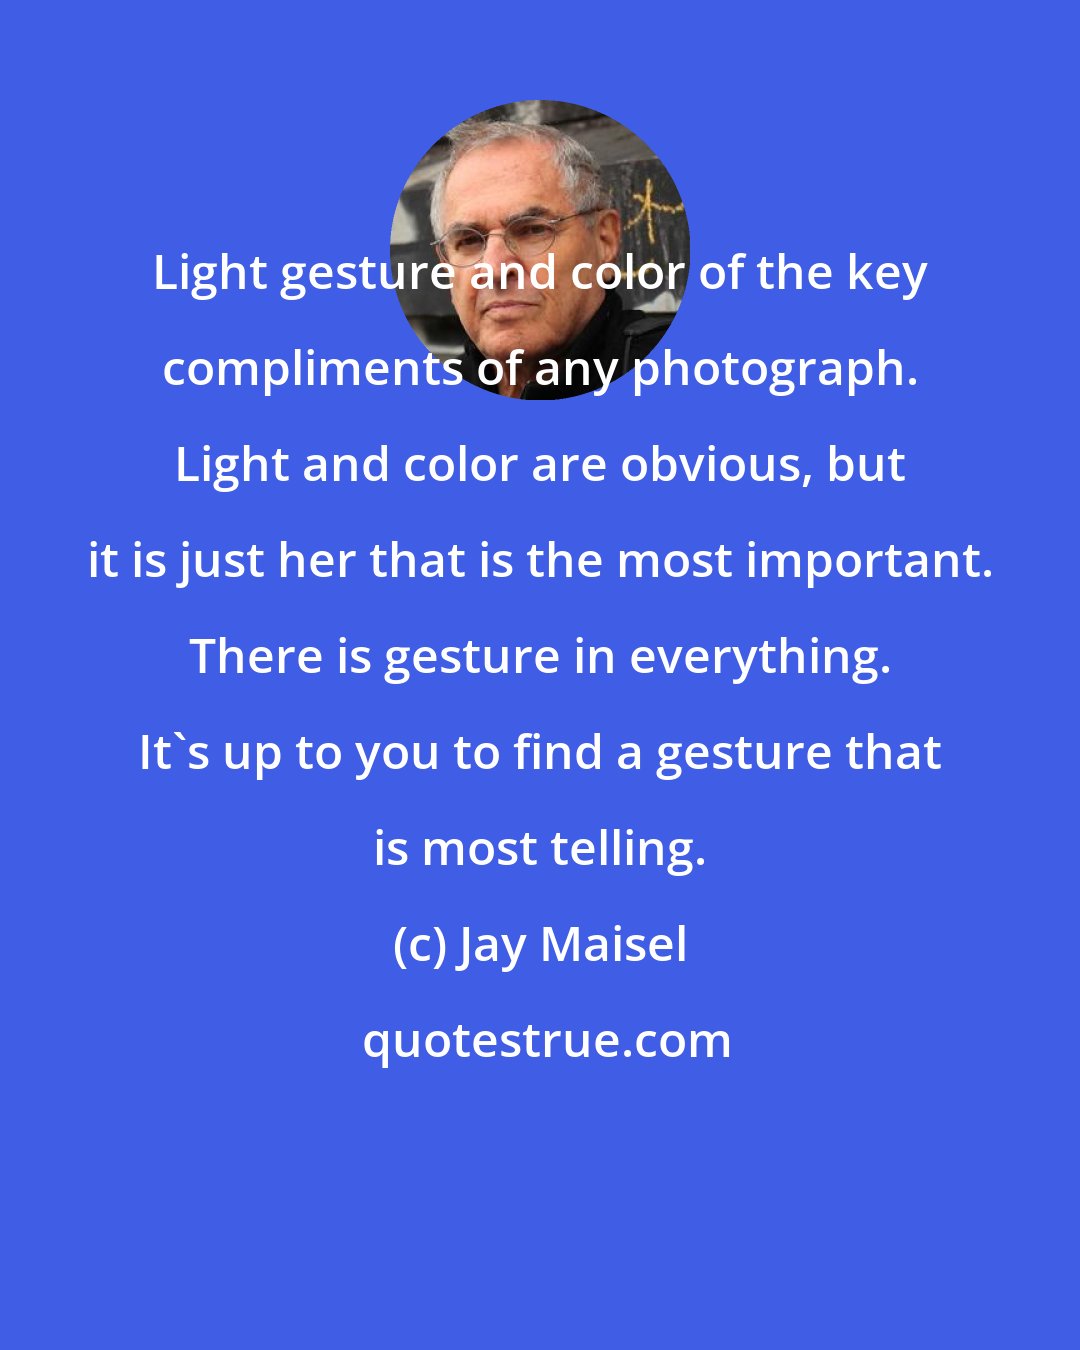 Jay Maisel: Light gesture and color of the key compliments of any photograph. Light and color are obvious, but it is just her that is the most important. There is gesture in everything. It's up to you to find a gesture that is most telling.